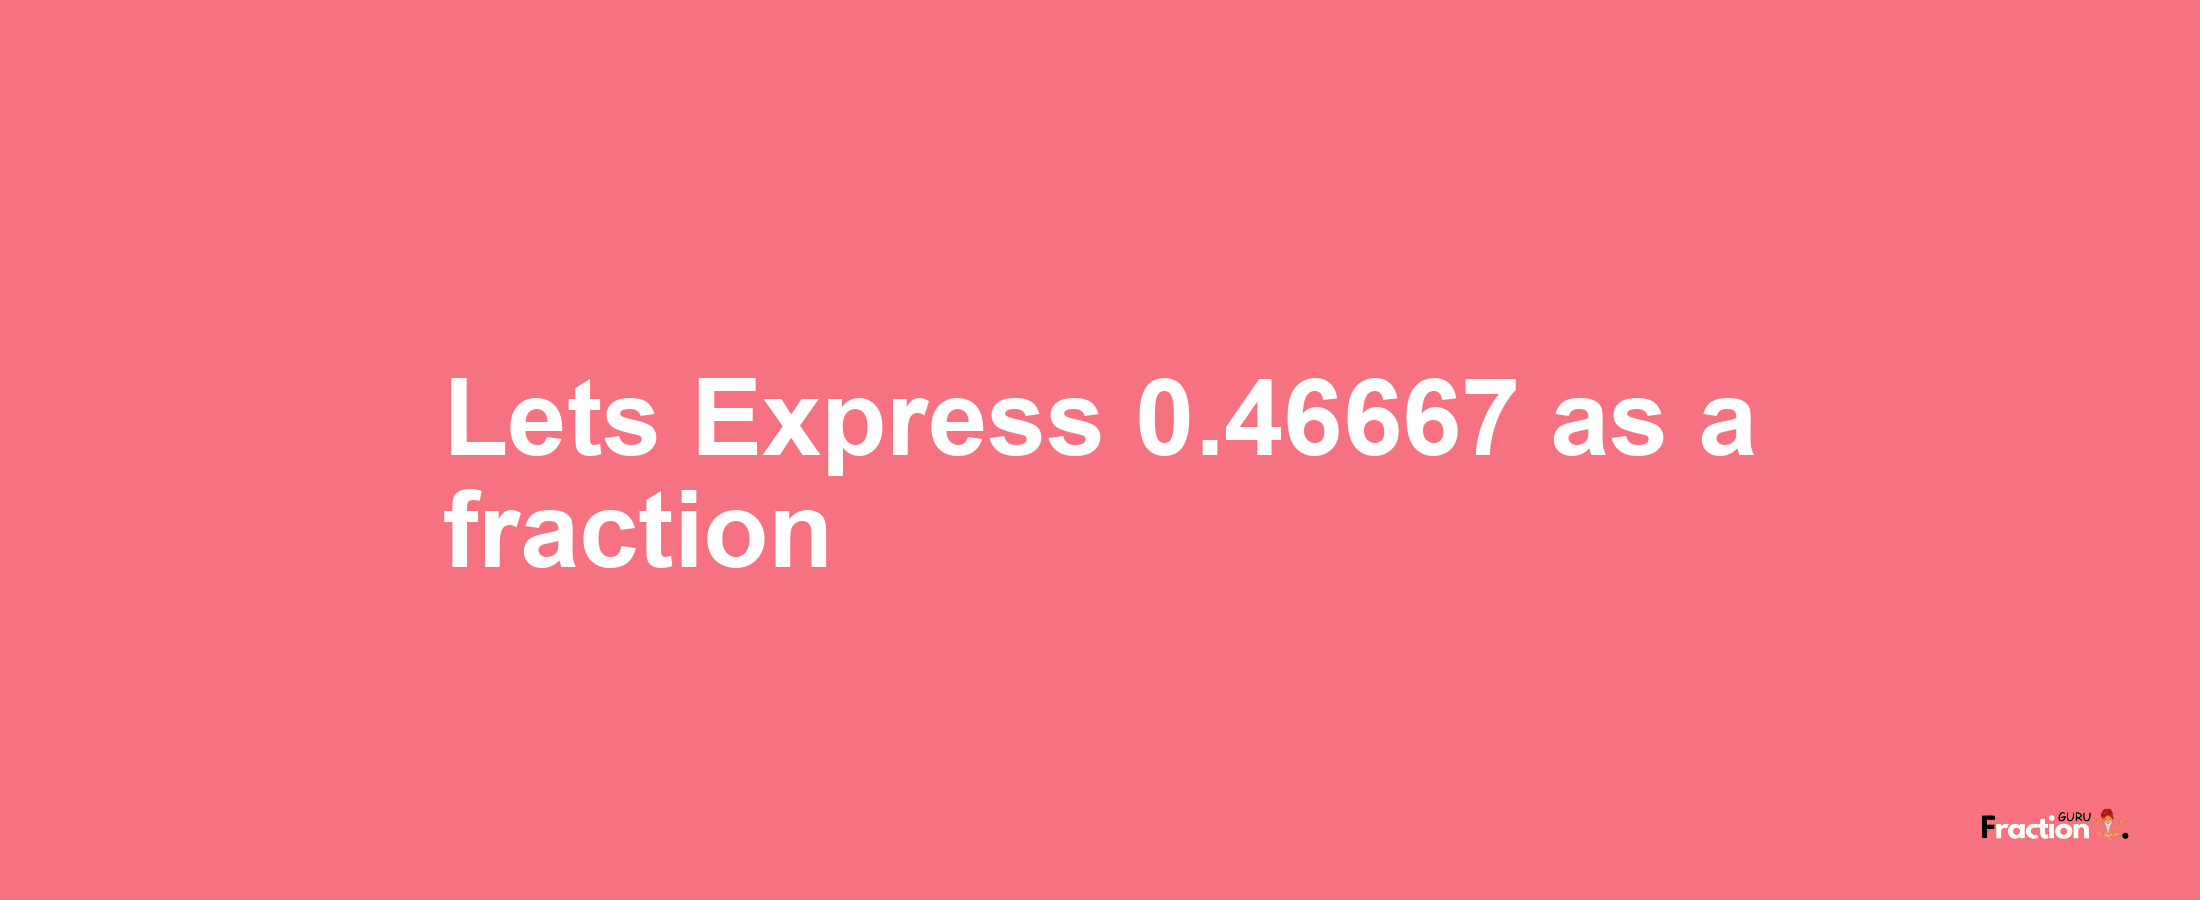 Lets Express 0.46667 as afraction